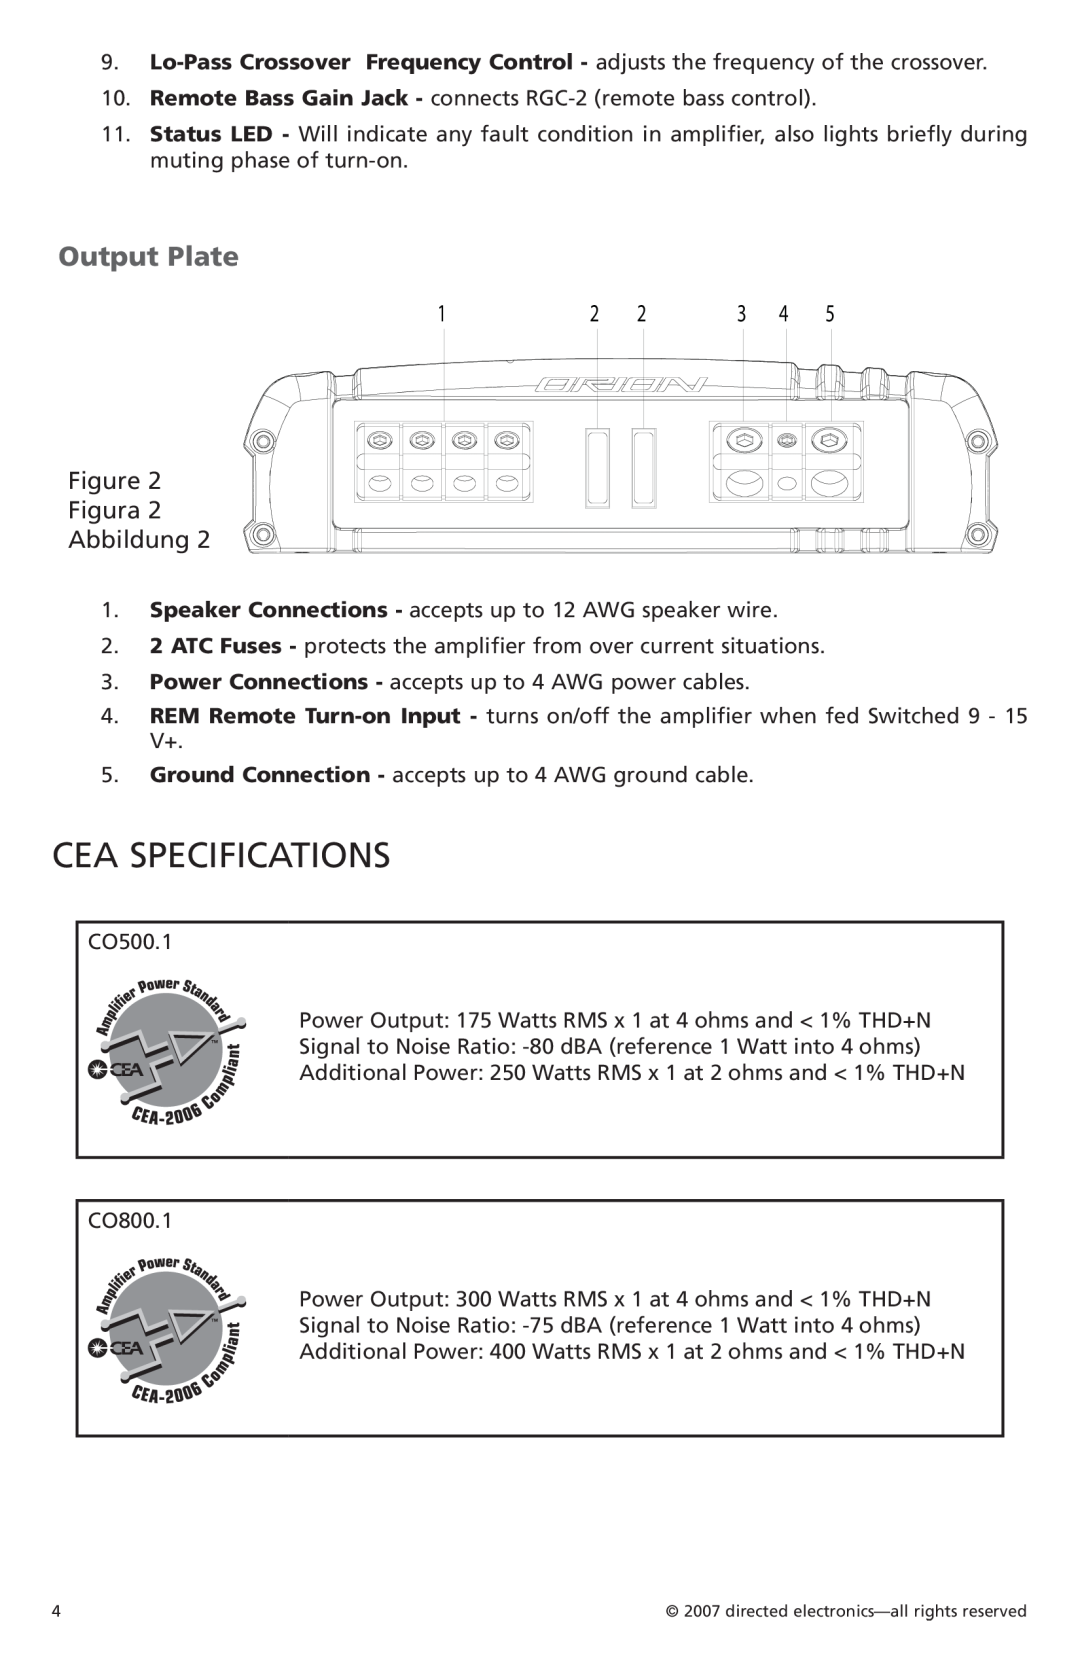 Orion Car Audio CO500.1, CO800.1 owner manual CEA Specifications, Output Plate, Figura Abbildung 